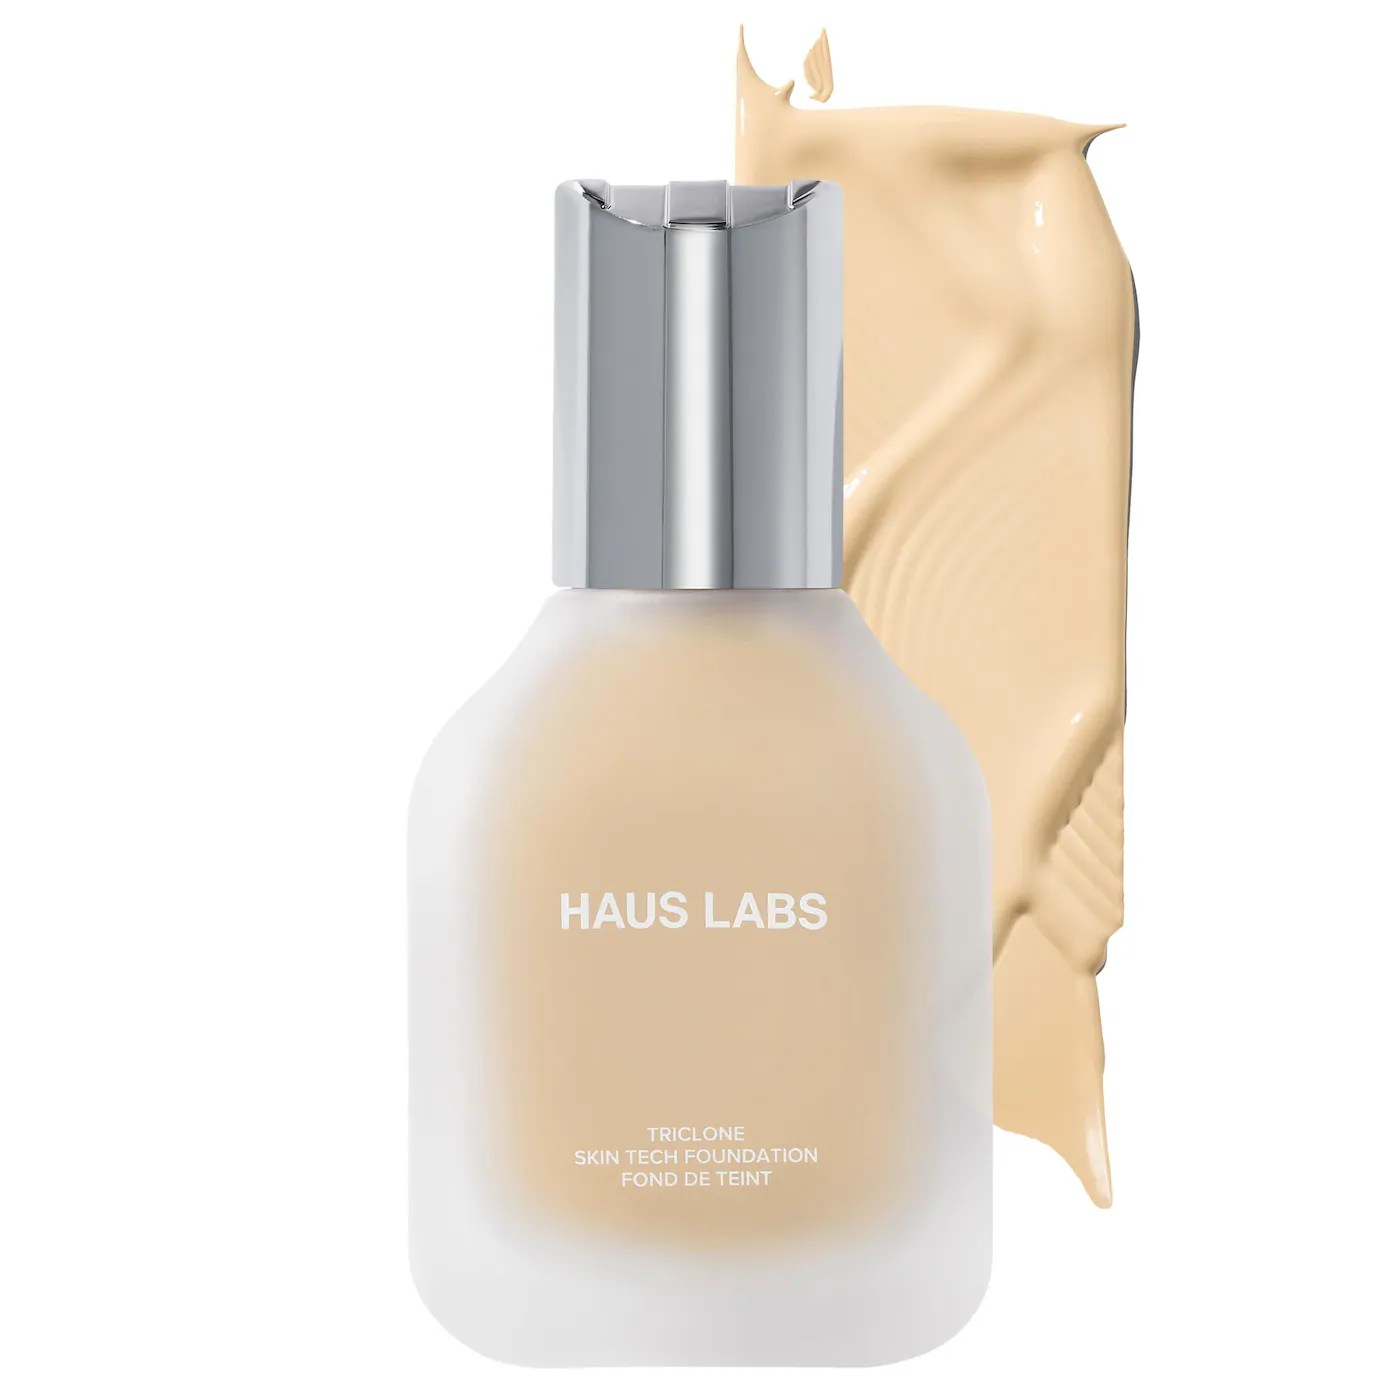 haus labs triclone skin tech, one of the best foundations for acne-prone skin